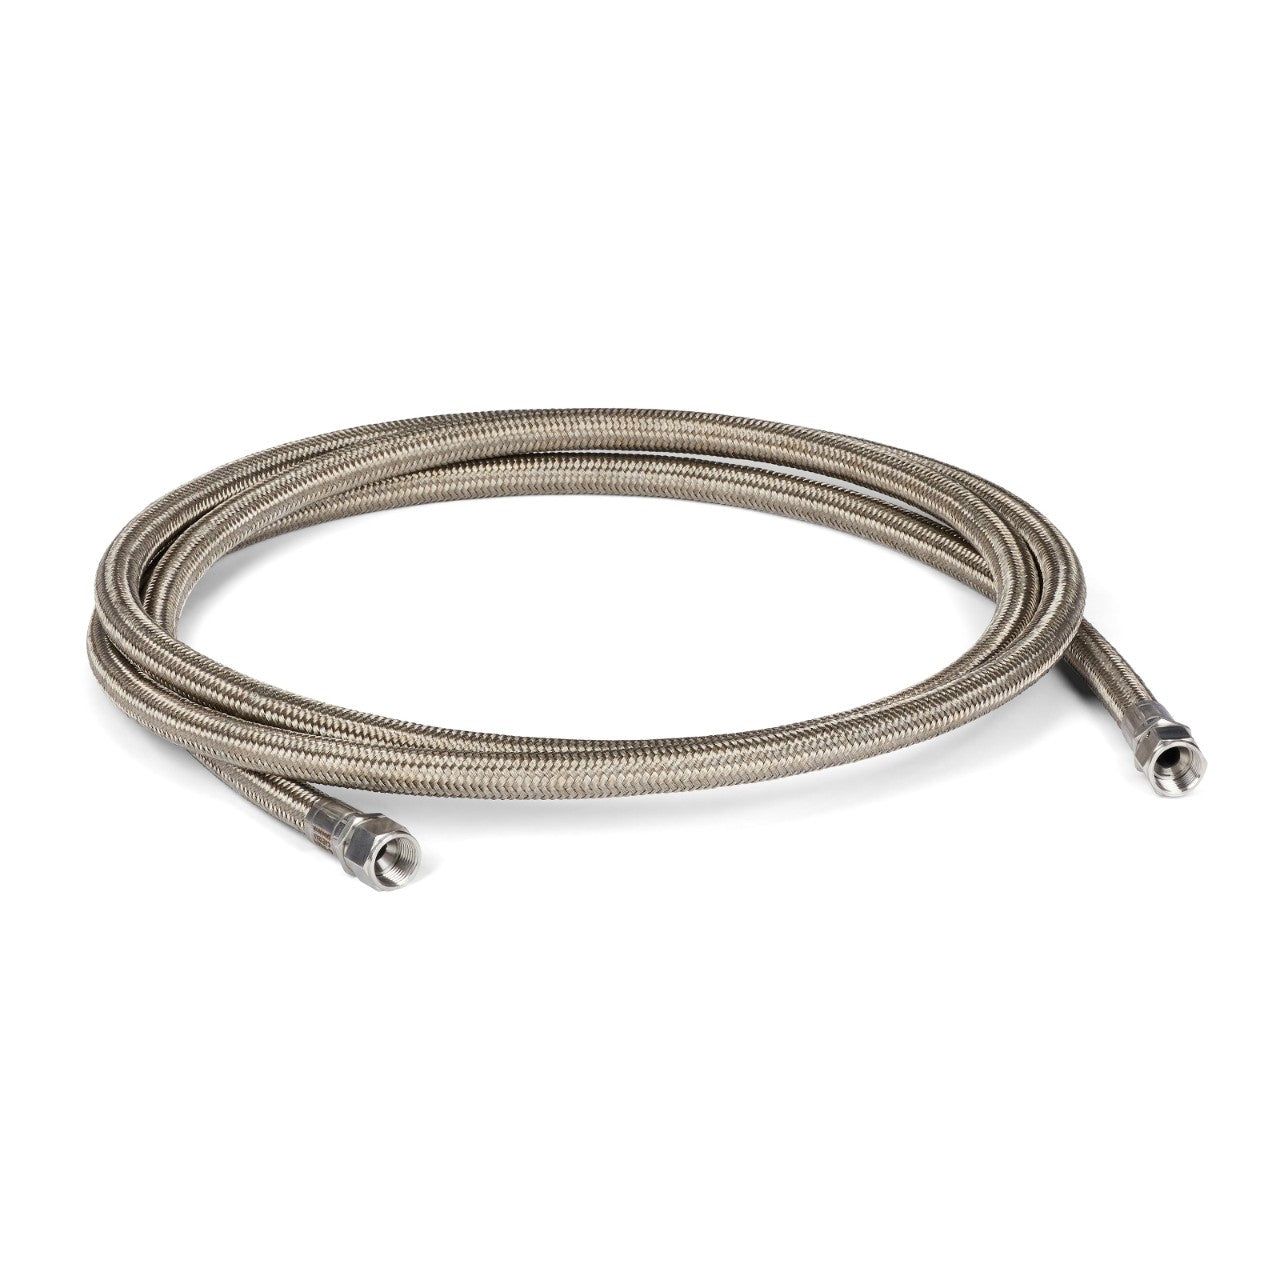 10 ft. (3.0 M) Stainless Steel Braided PTFE Ambient Hose,  No. 6 (0.31 in. / 7.9 mm ID)